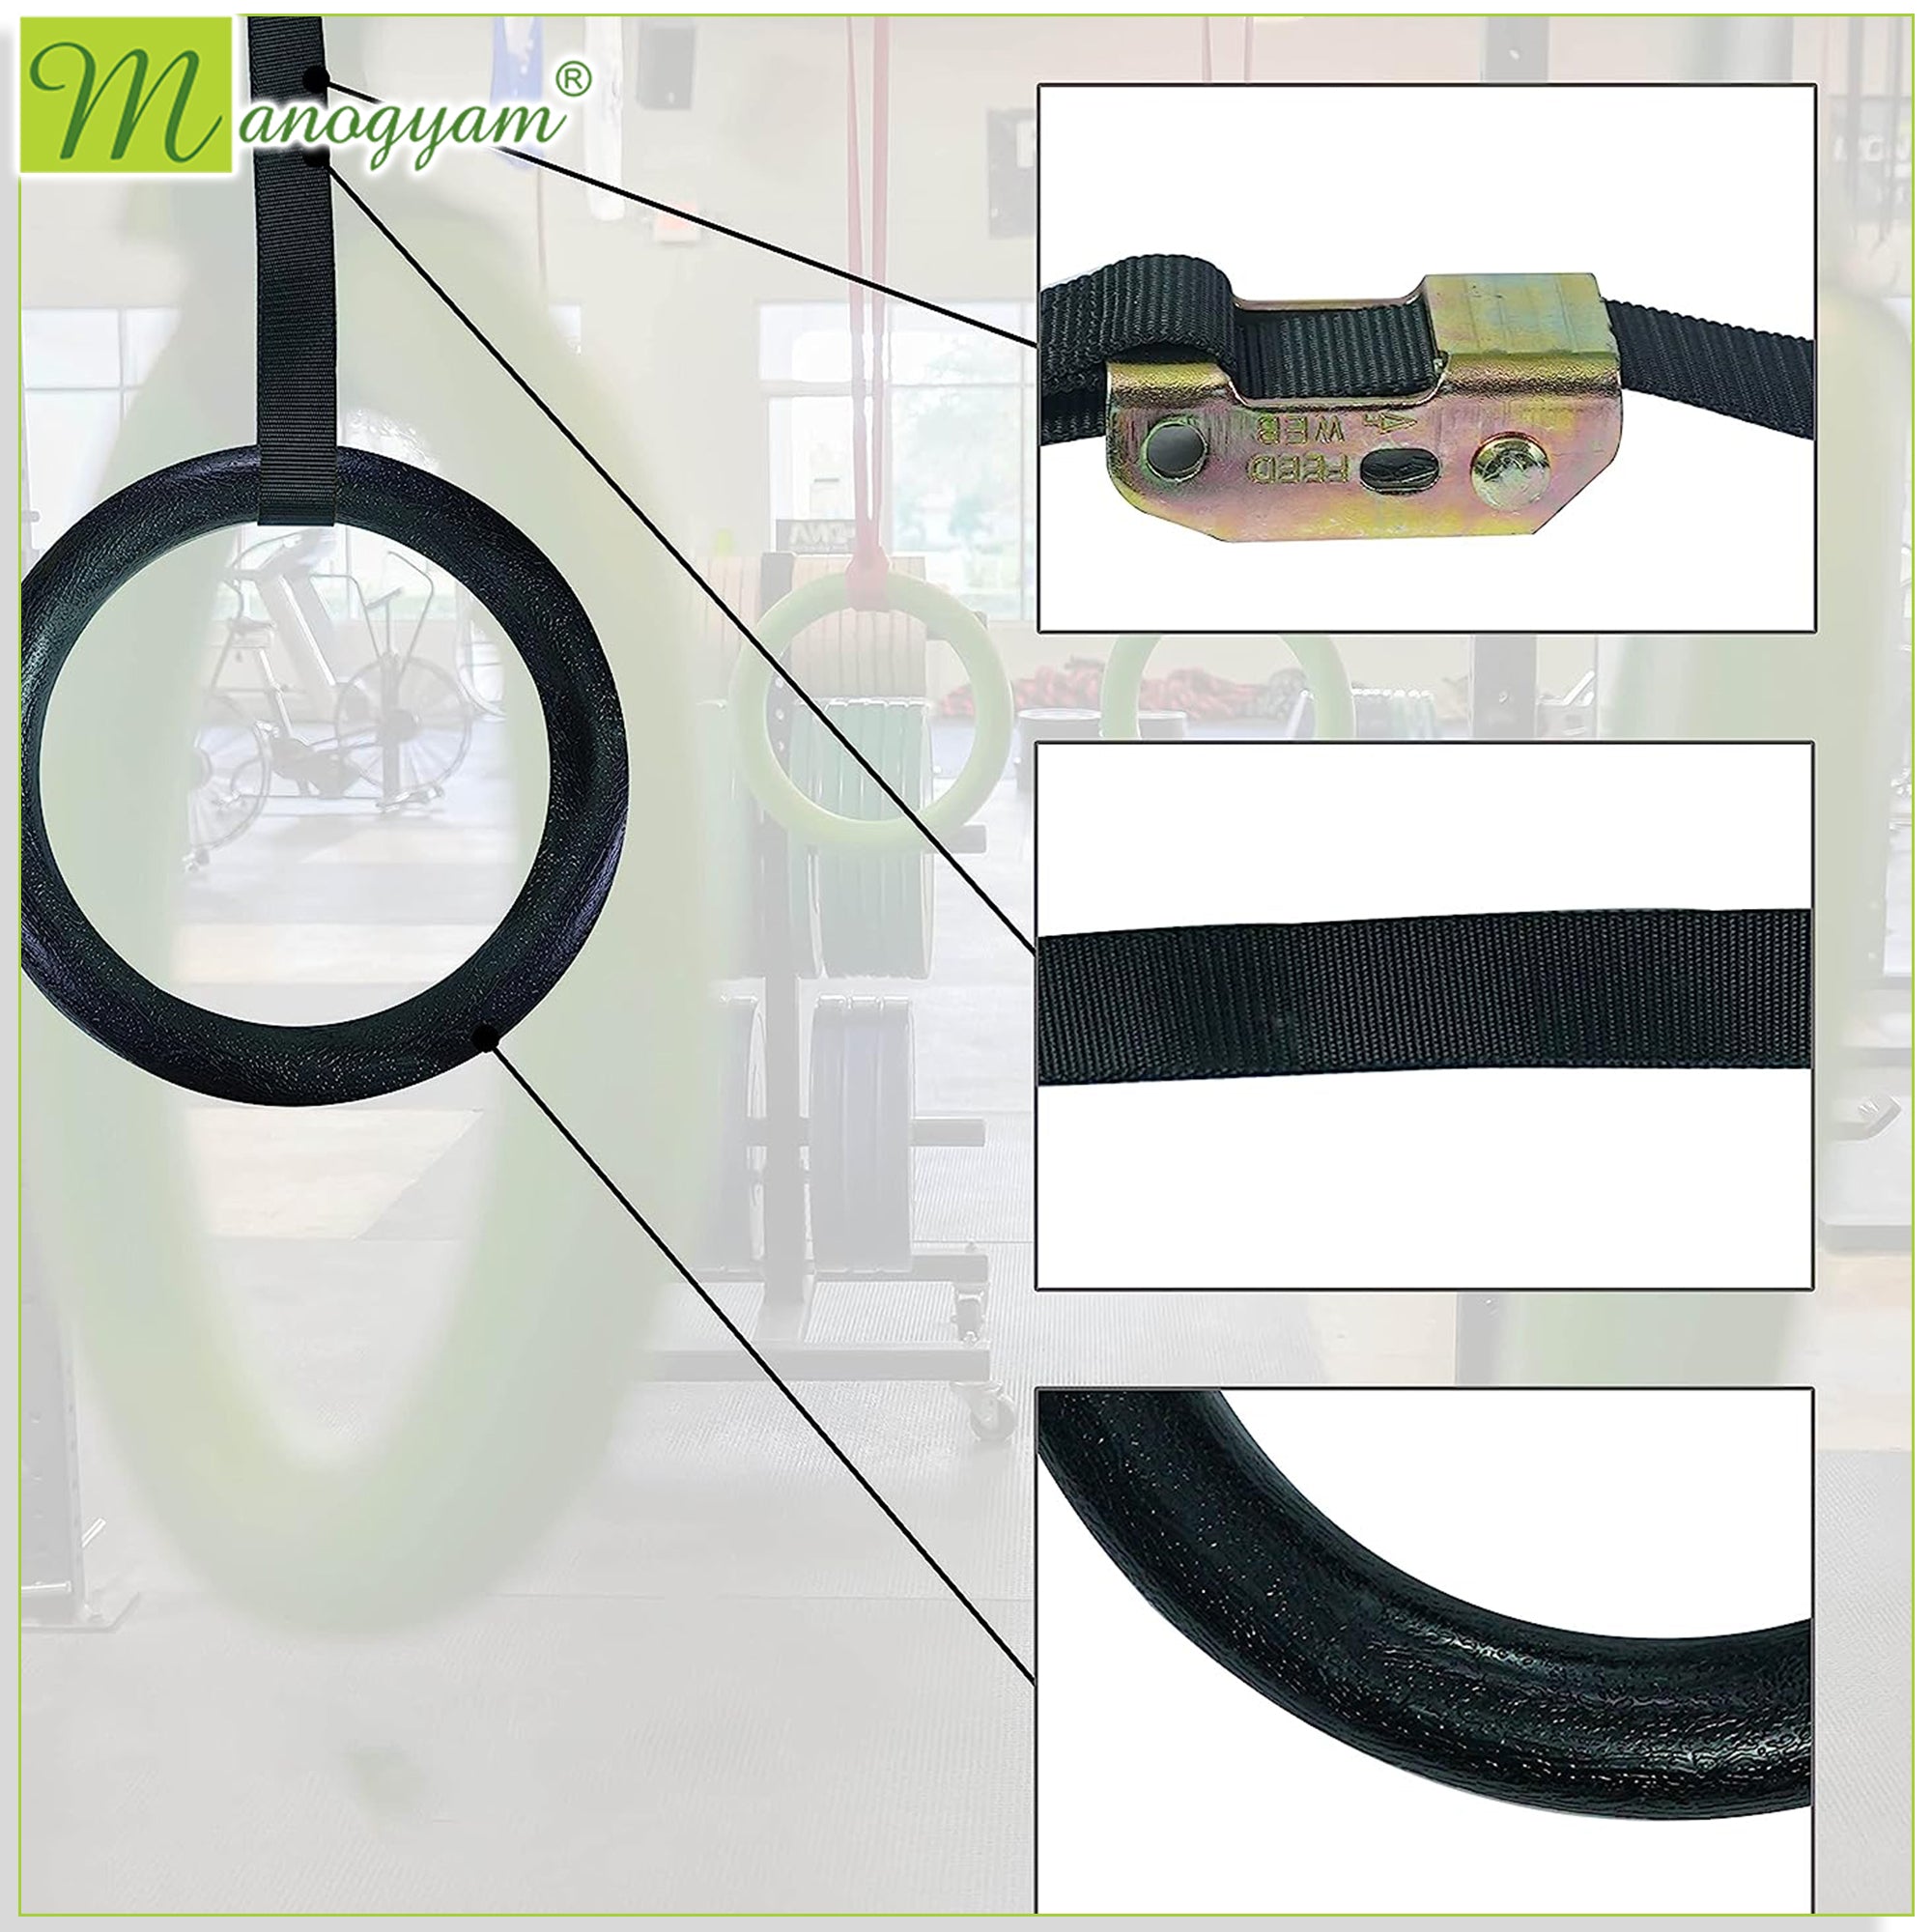 Manogyam Workout Wood Gymnastic Pull Up Rings,15FT Adjustable  Straps,Non-Slip 32 MM for Fitness Accessory Kit Kit - Buy Manogyam Workout  Wood Gymnastic Pull Up Rings,15FT Adjustable Straps,Non-Slip 32 MM for  Fitness Accessory